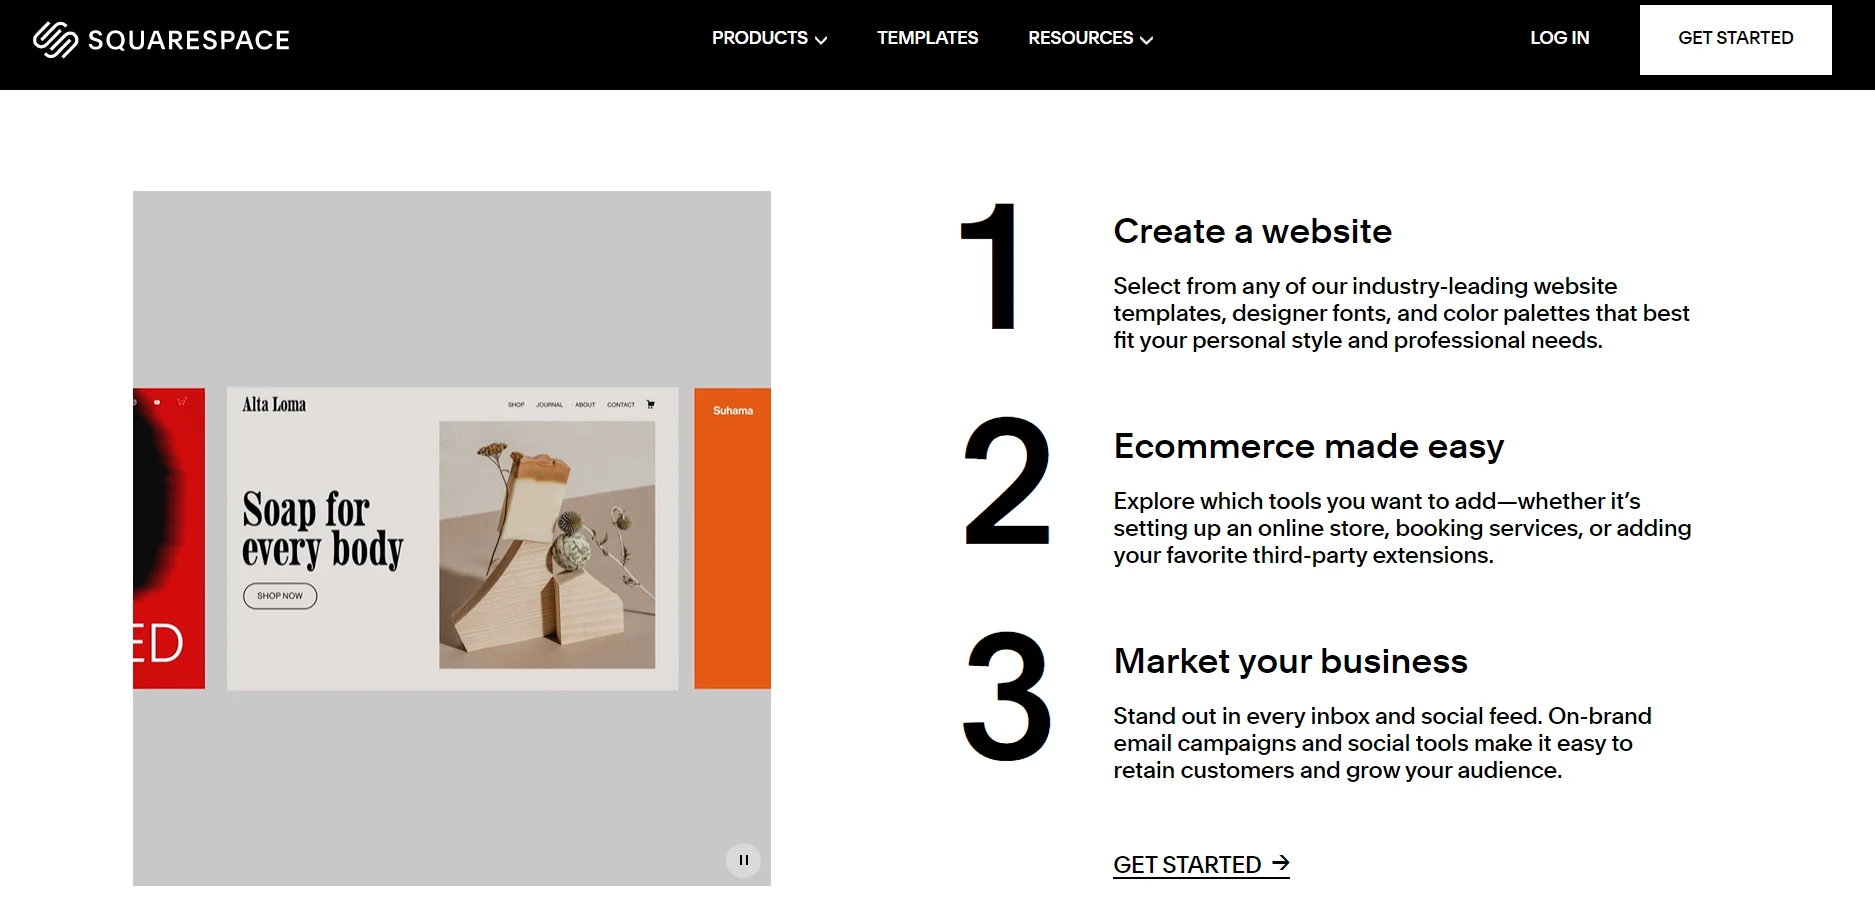 How To Get Started on Squarespace